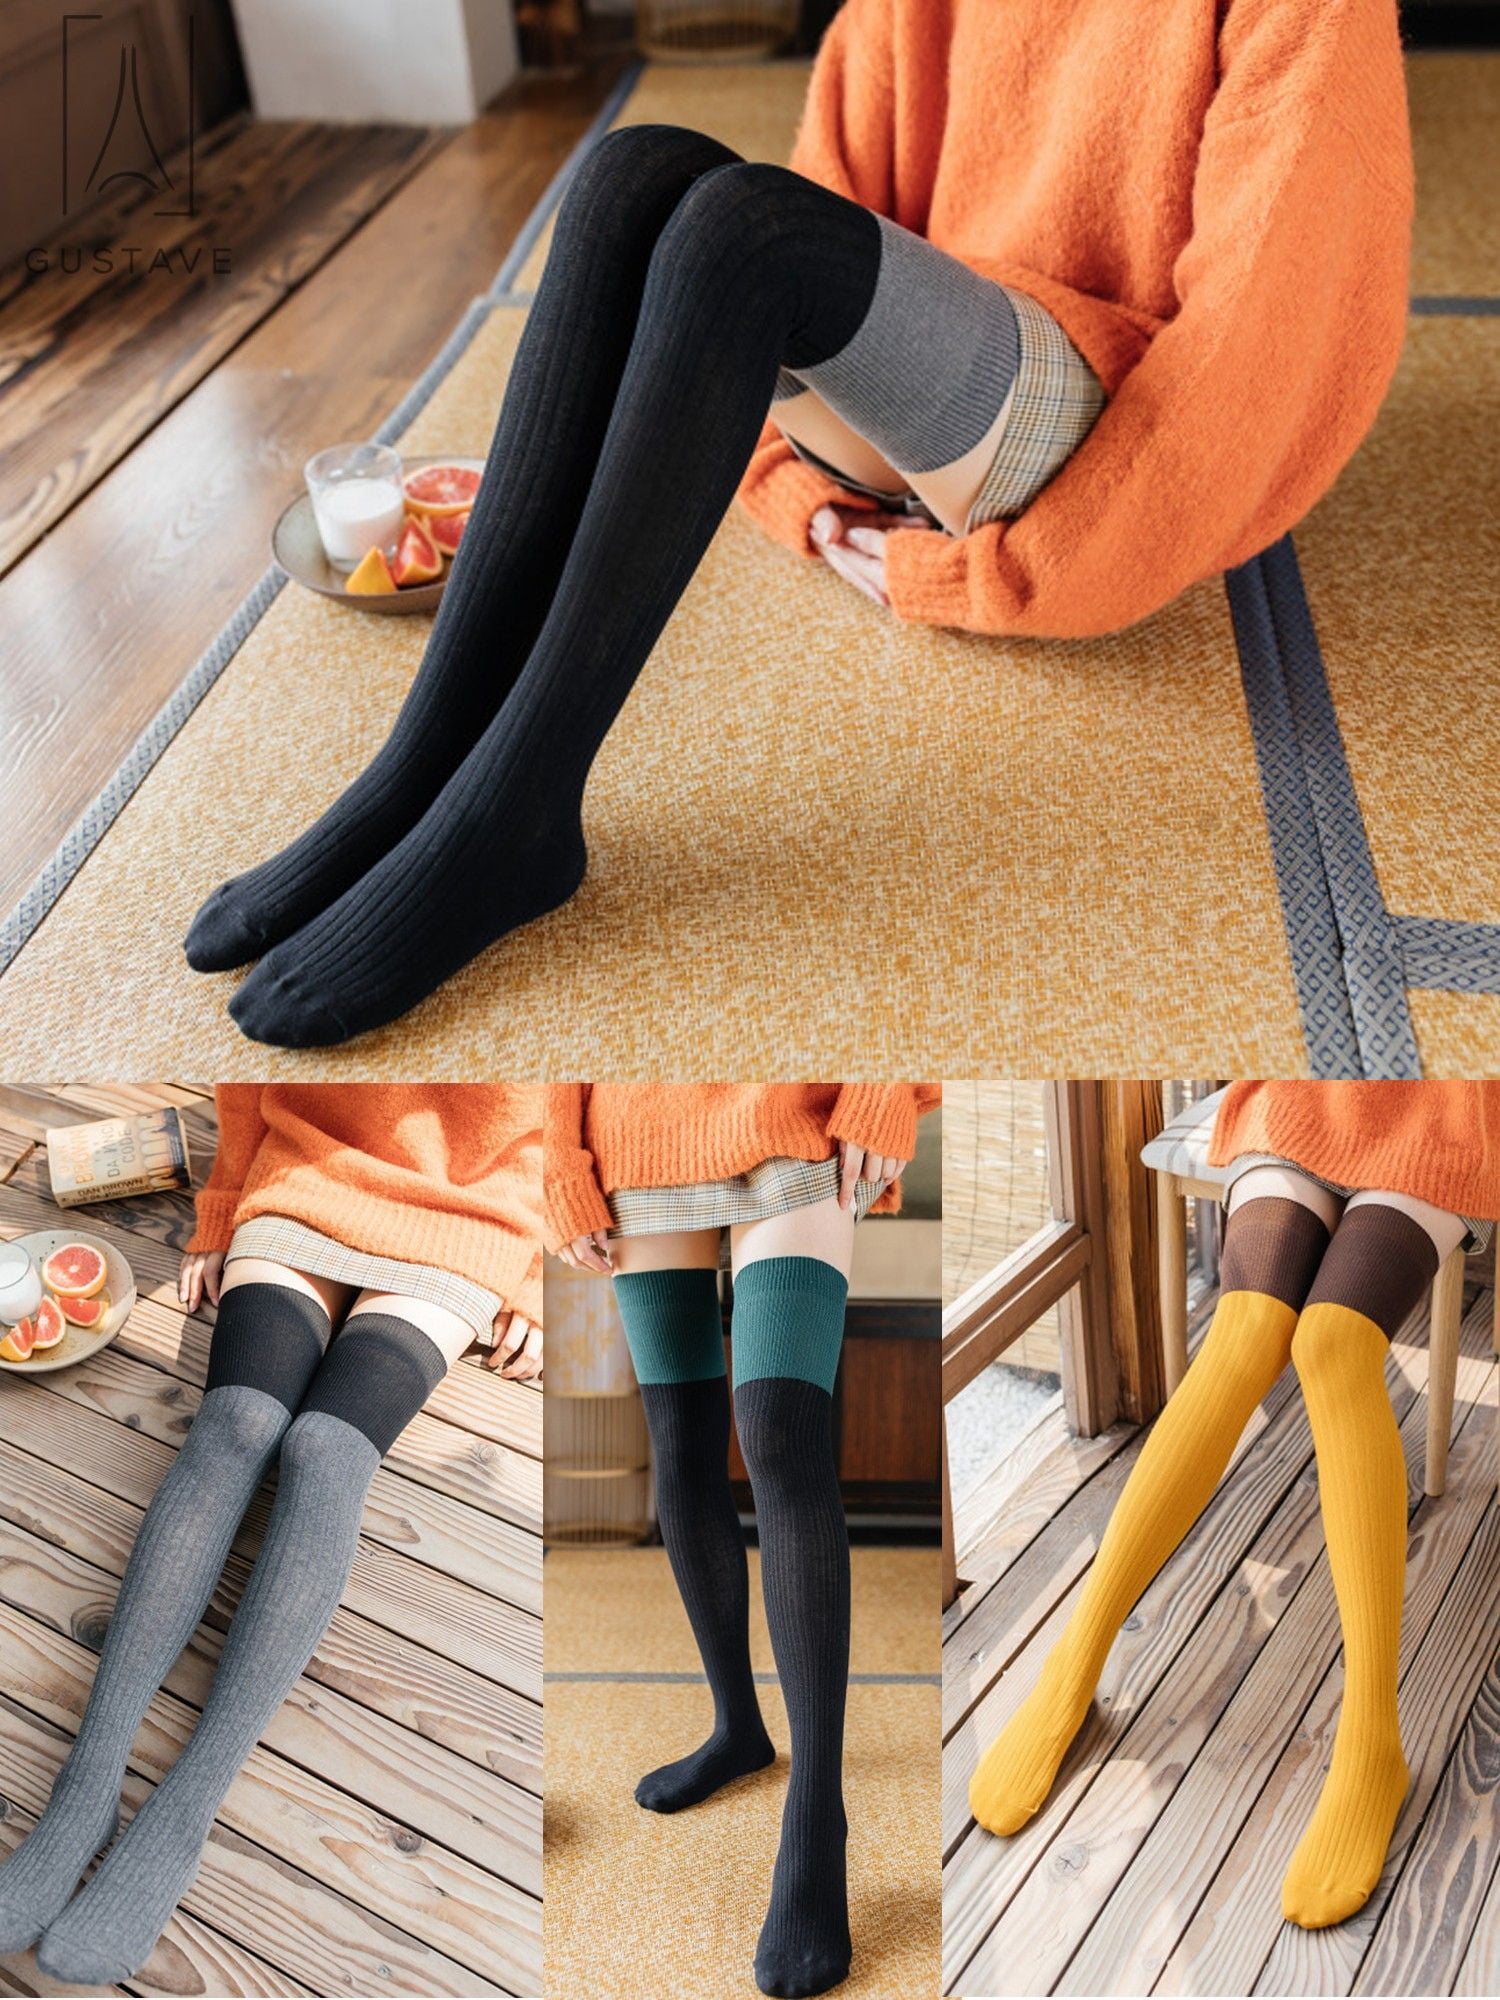 TOSSPER 4 Pairs Women's Silk Thigh High Stockings Extra Long Boot Socks for Women Halloween Cosplay Costume Party Accessory